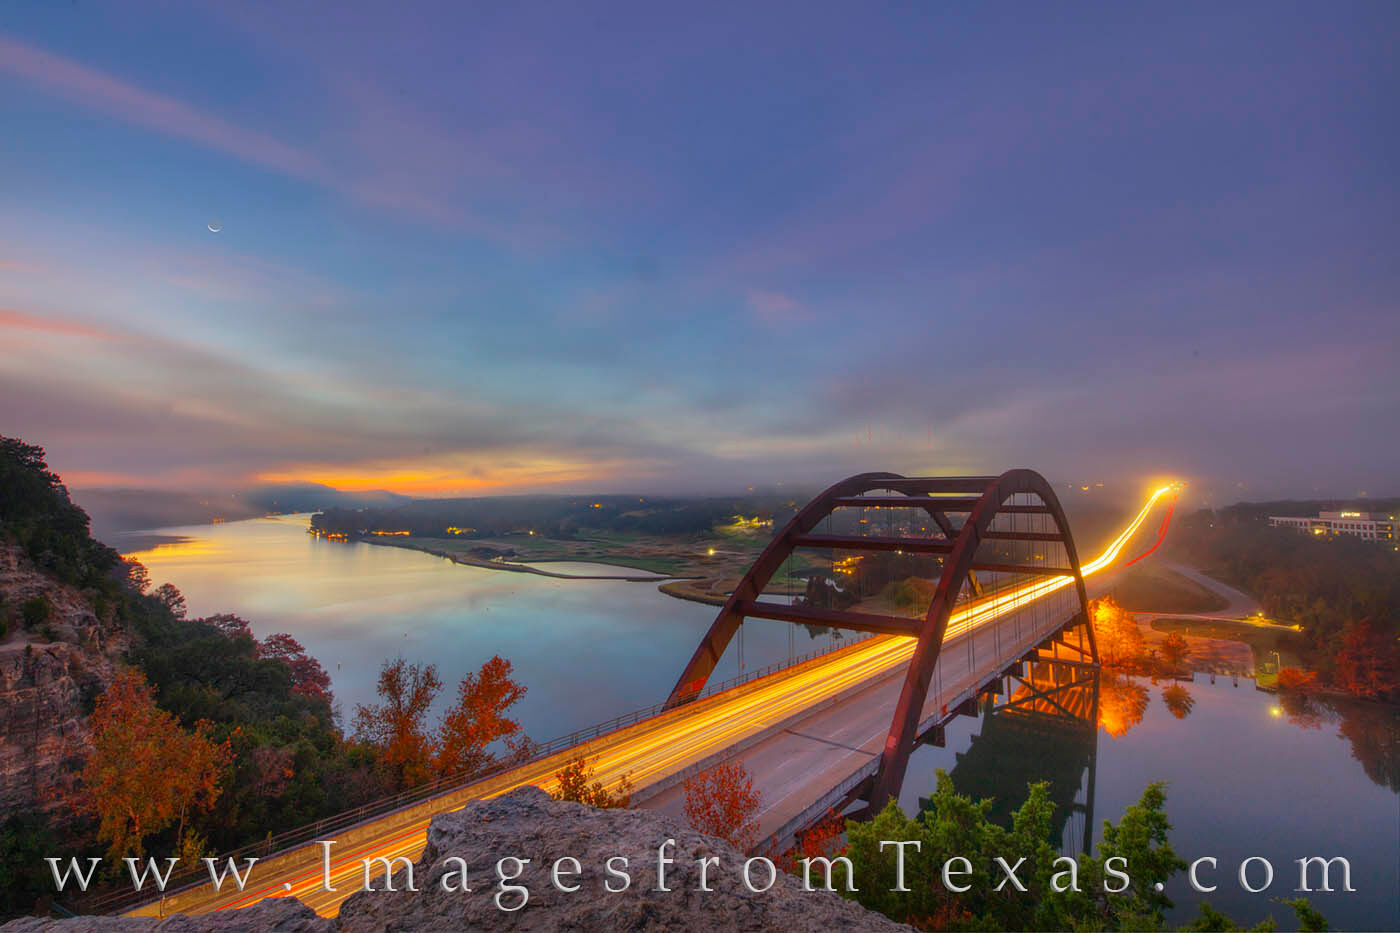 About 25 minutes before sunrise, the crescent moon rises into the misty skies over central Texas. Near the 360 Bridge (Pennybacker...